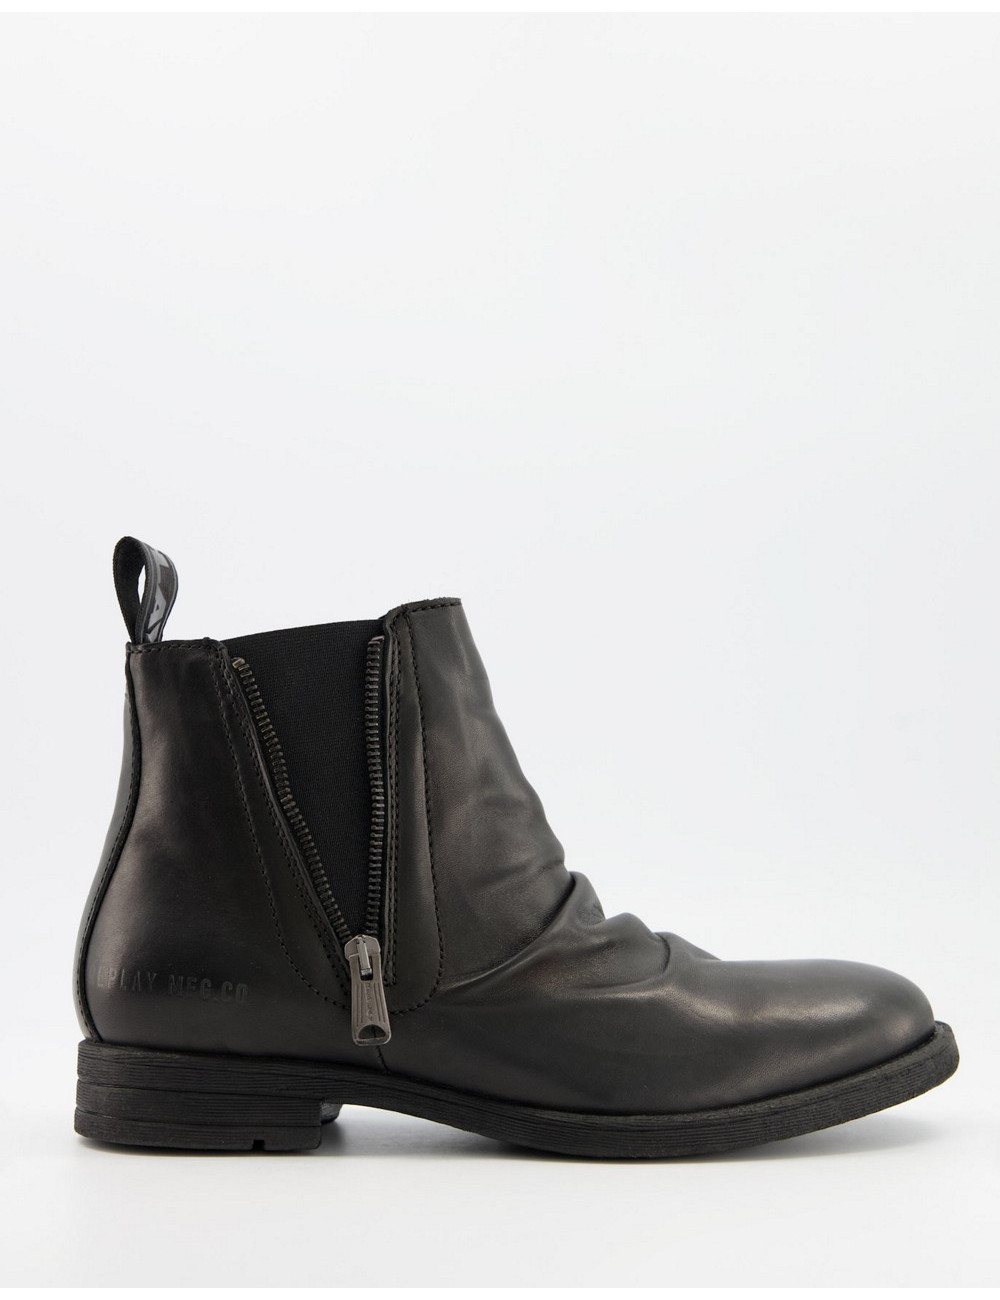 Replay leather chelsea boots